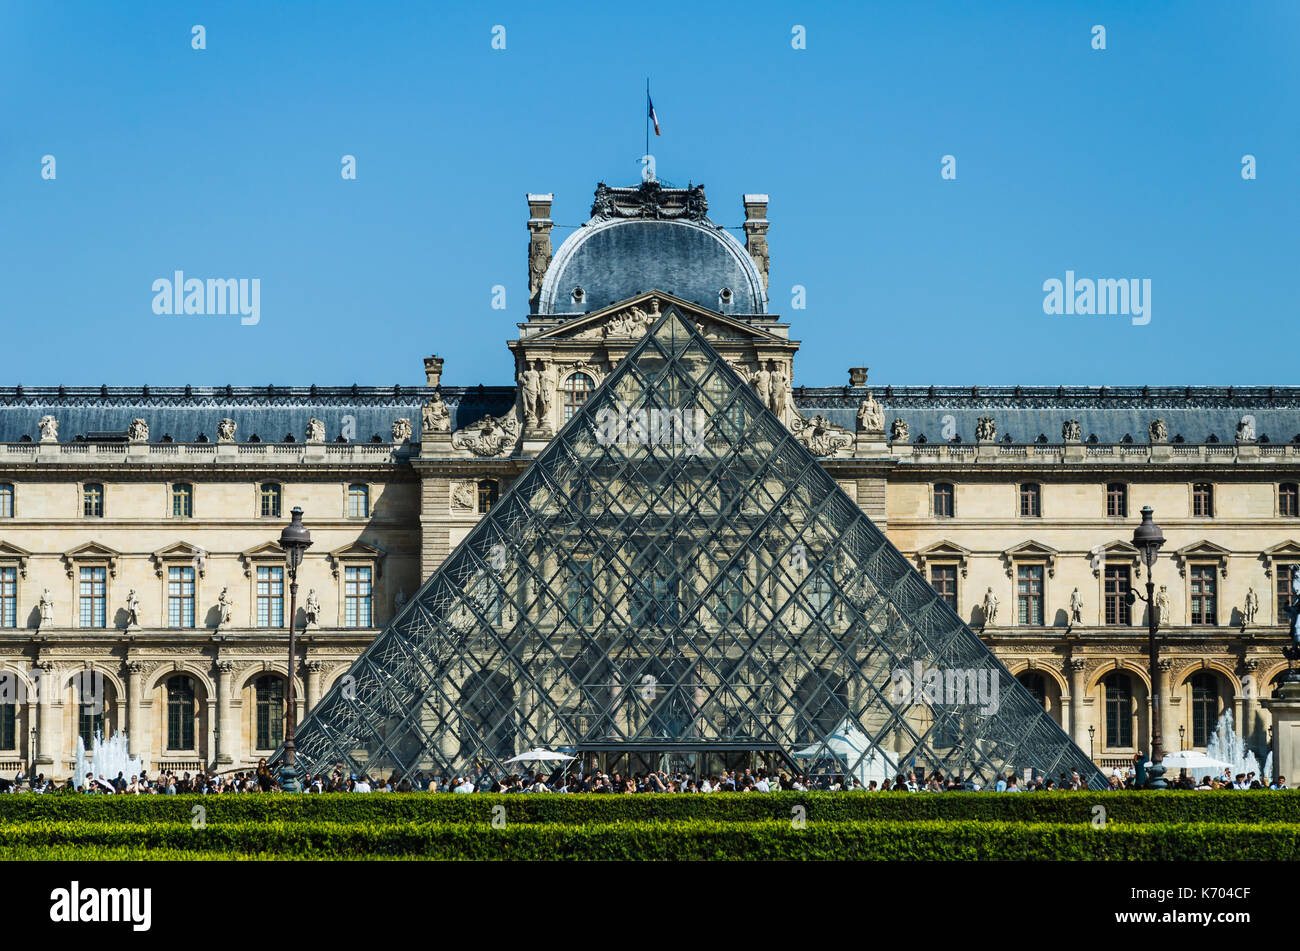 Paris, France - May 17, 2014: Glass pyramid in front of the Louvre Museum in Paris. Stock Photo